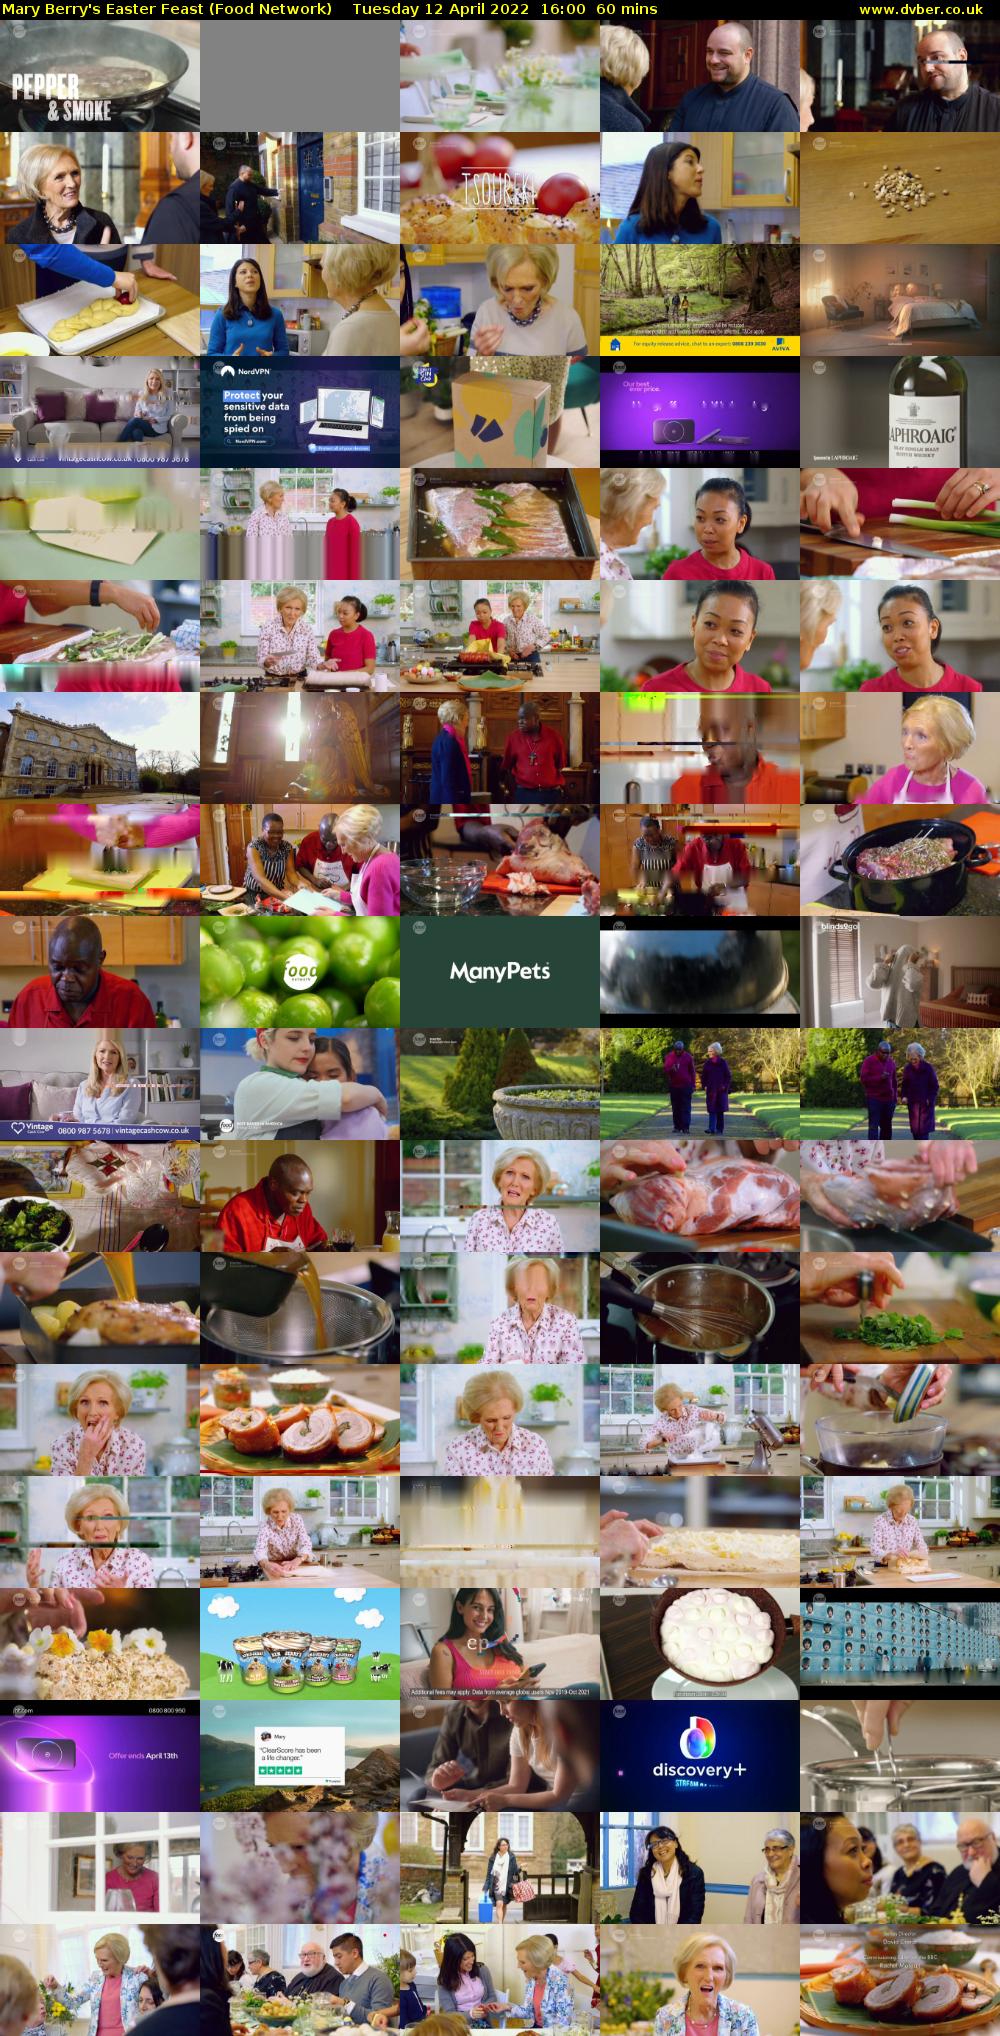 Mary Berry's Easter Feast (Food Network) Tuesday 12 April 2022 16:00 - 17:00